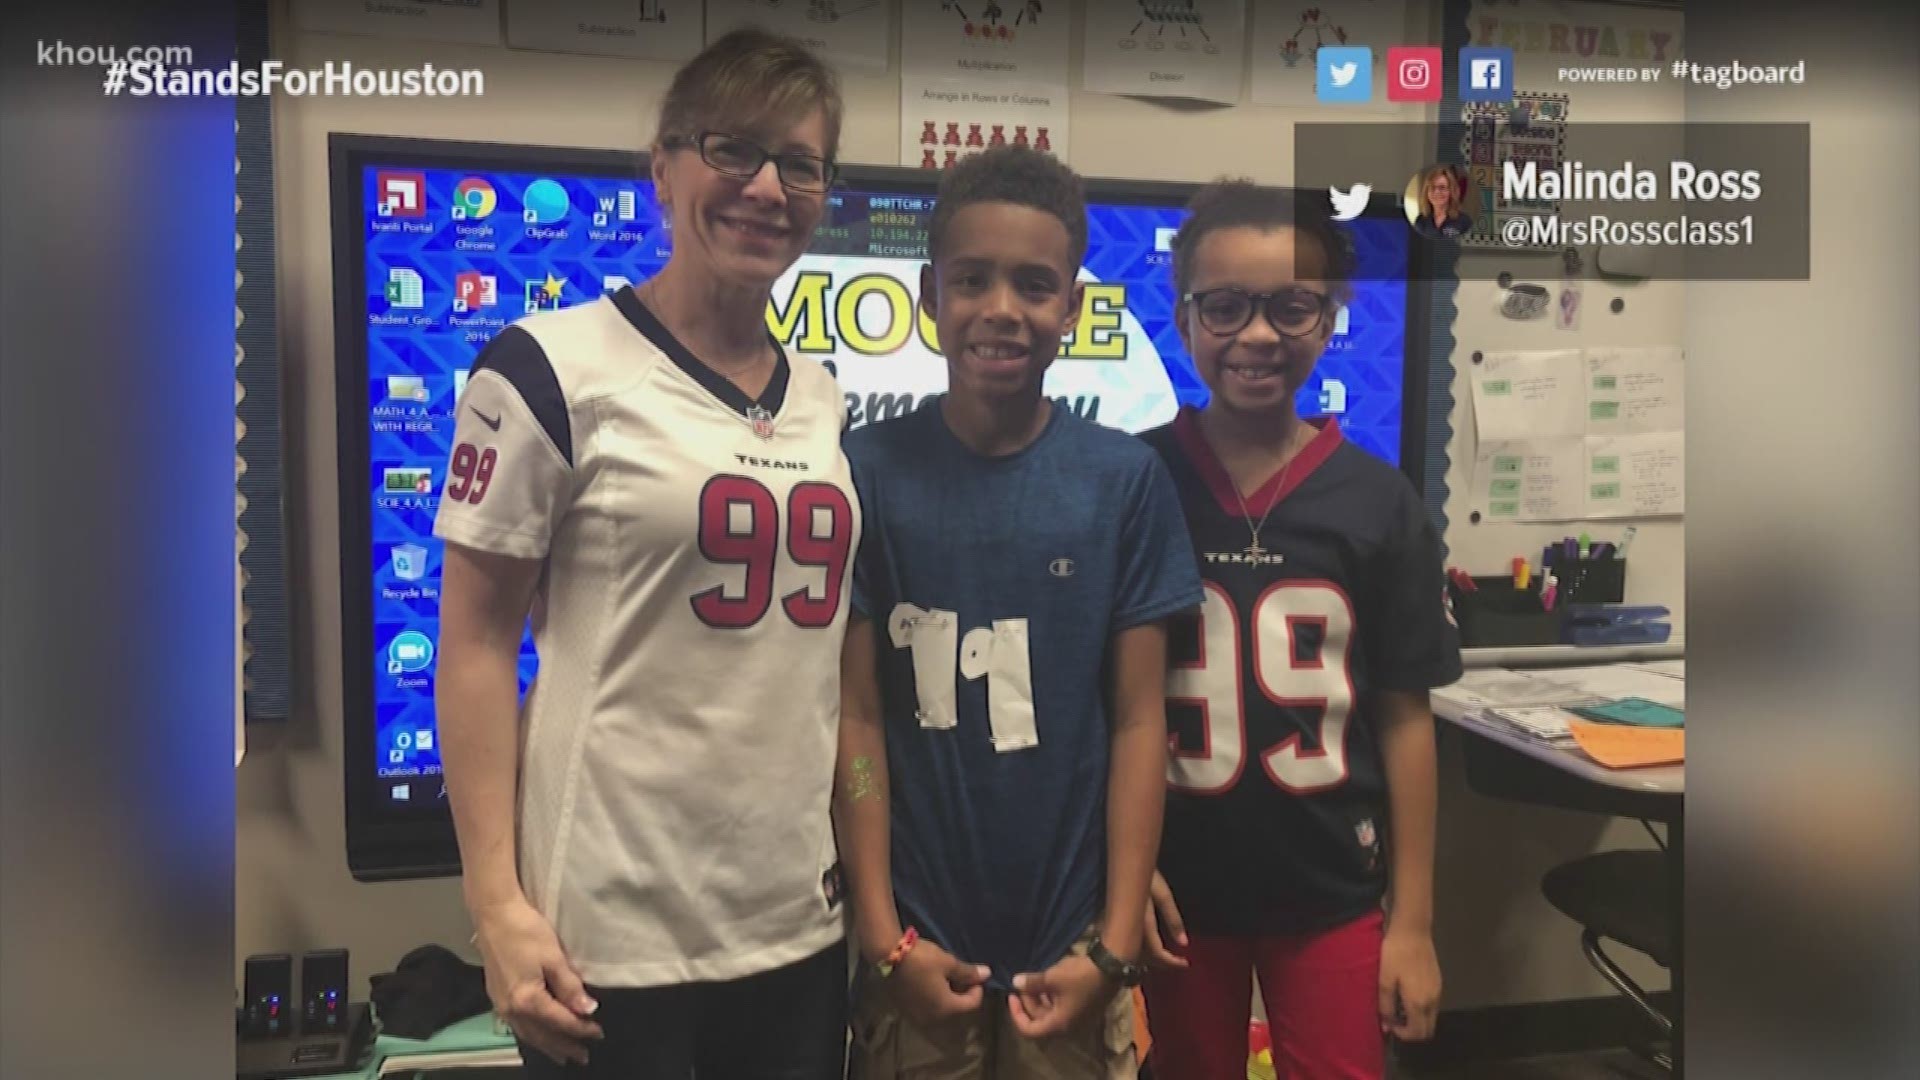 jersey day at school